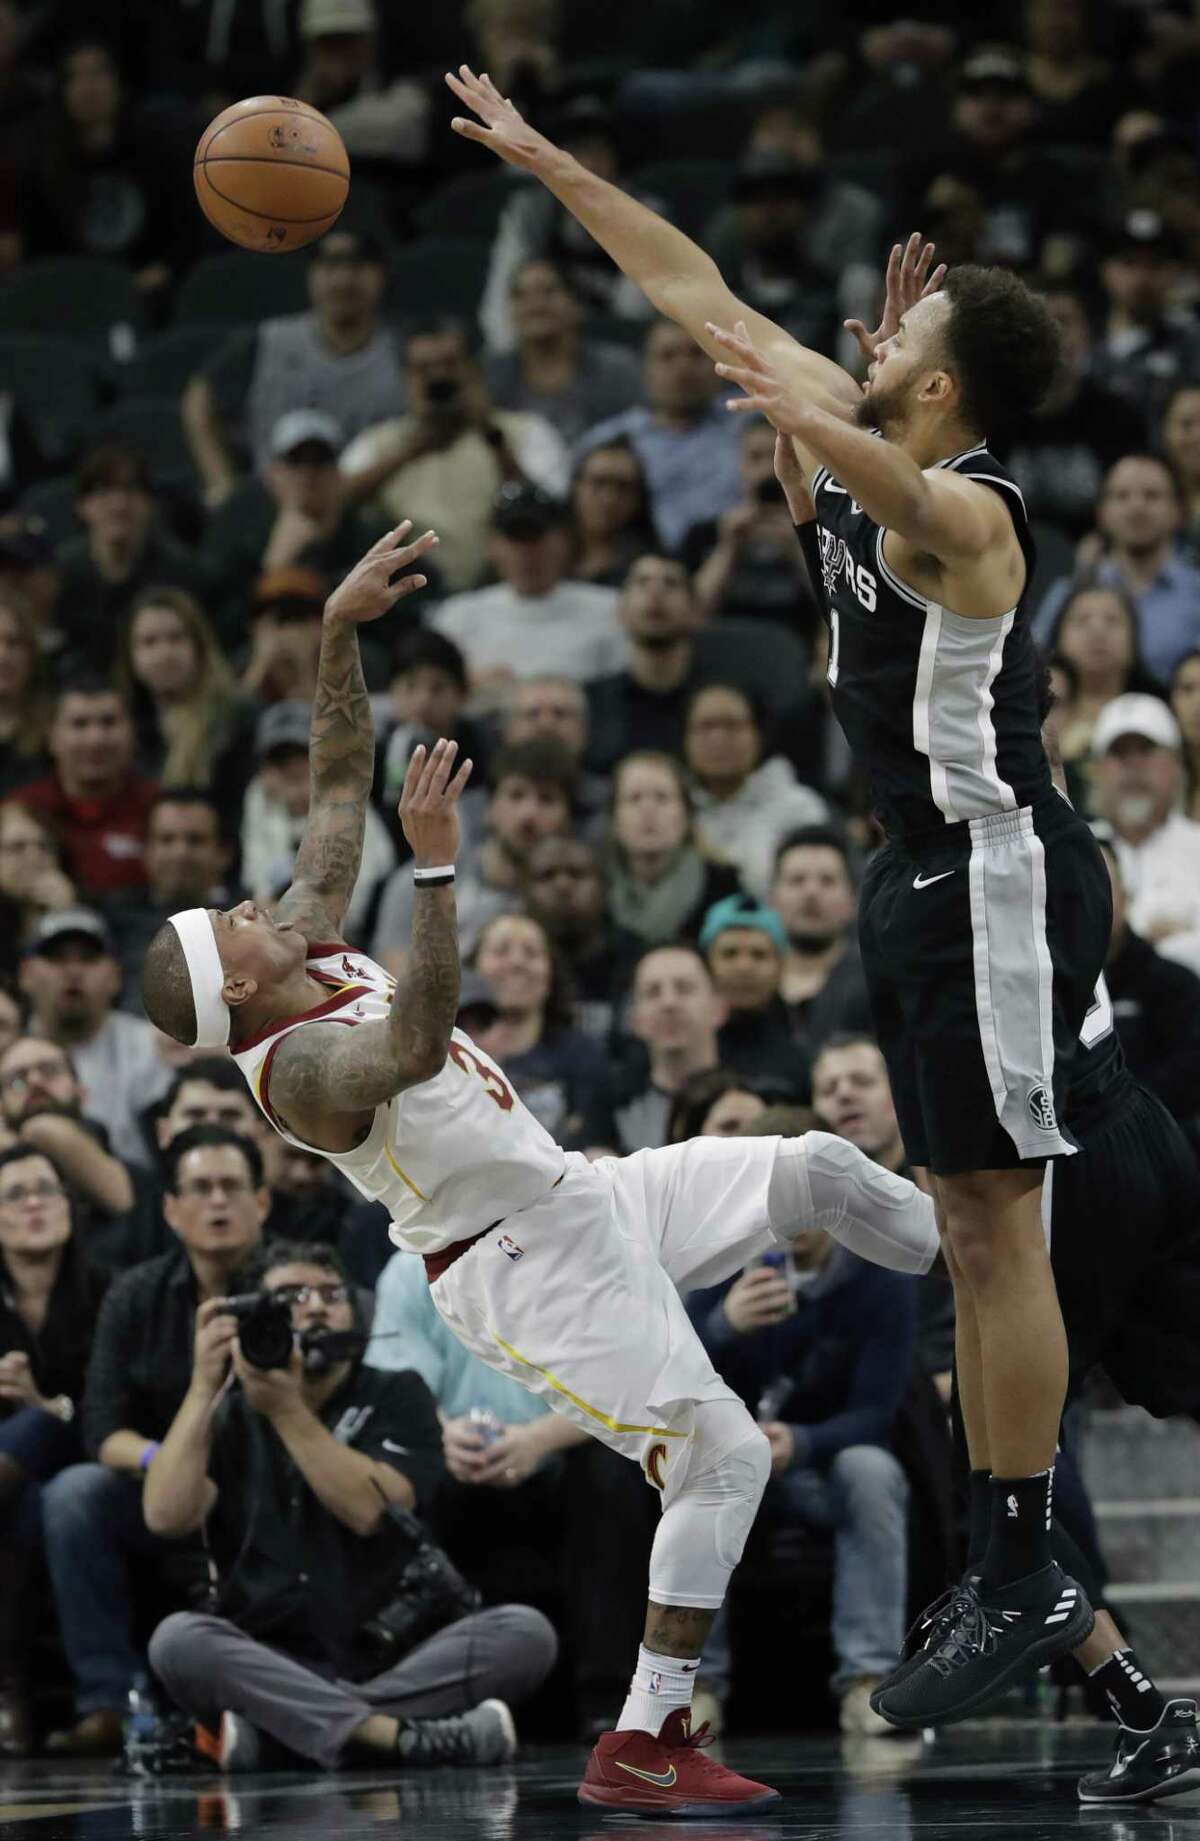 Cleveland Cavaliers guard Isaiah Thomas (3) shoots over San Antonio Spurs forward Kyle Anderson (1) during the second half of an NBA basketball game, Tuesday, Jan. 23, 2018, in San Antonio. San Antonio won 114-102.